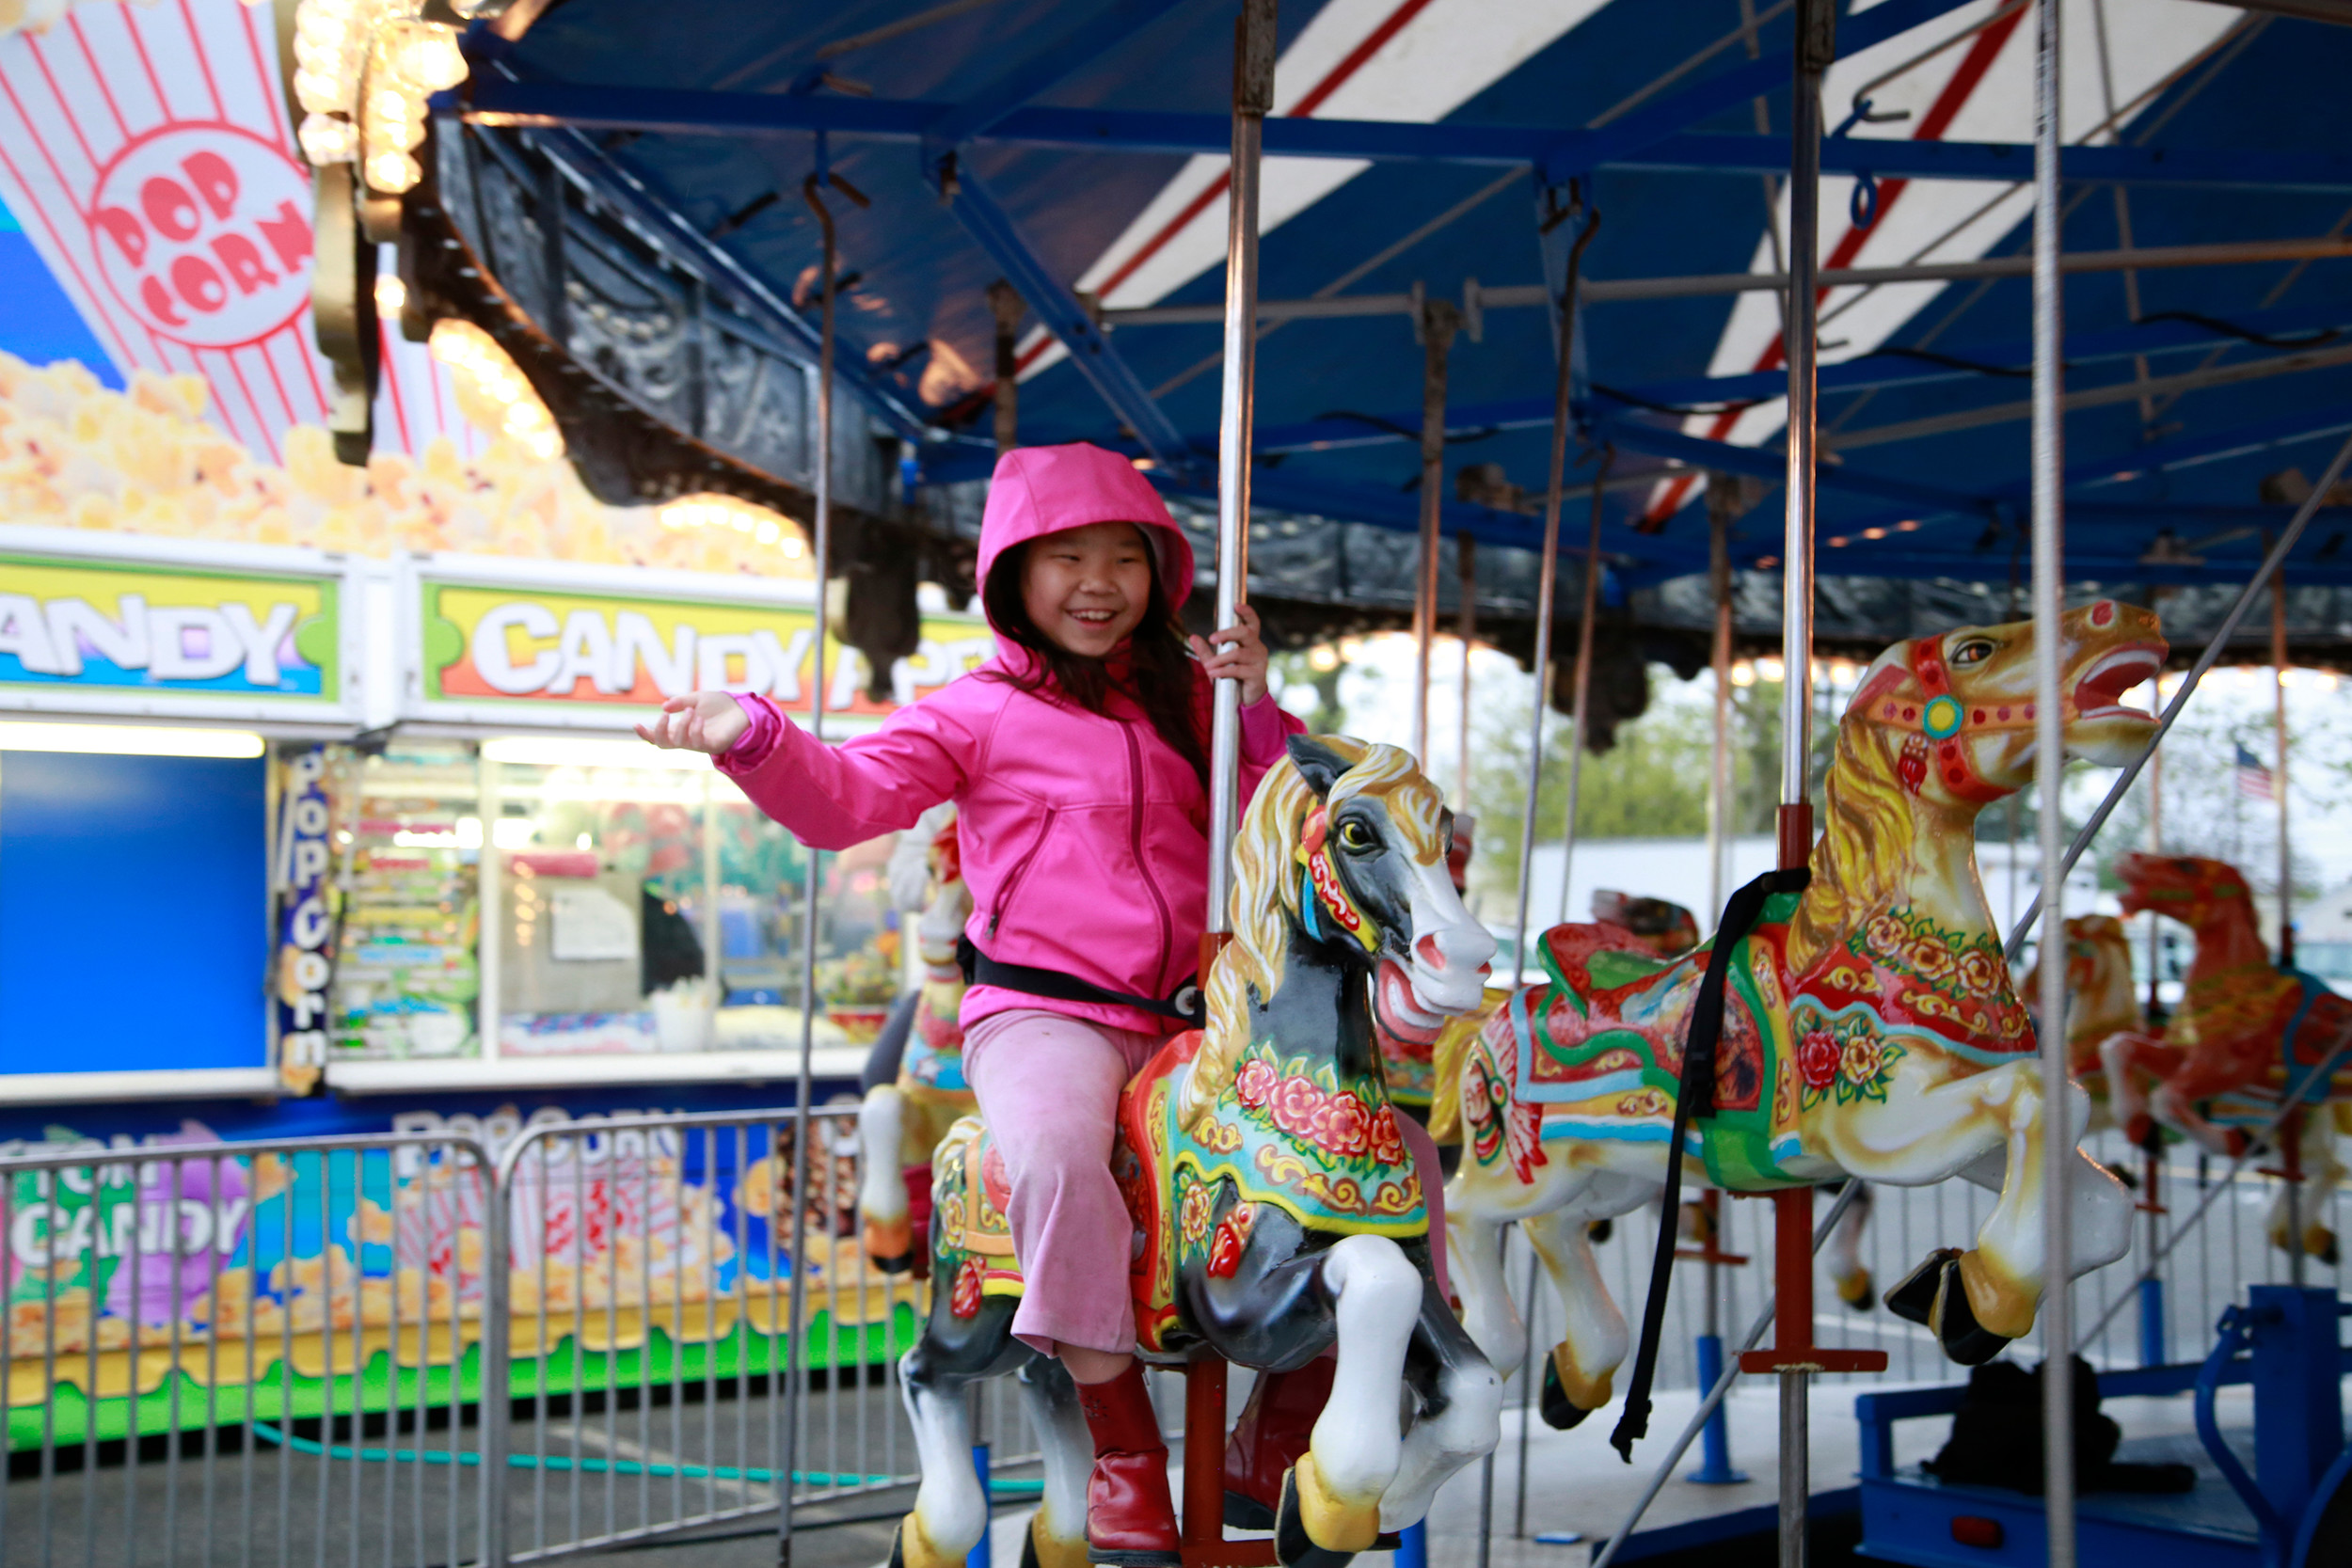 9-year-old Amanda Chou appeared to be having a ball as she rode the carousel at last year’s event.